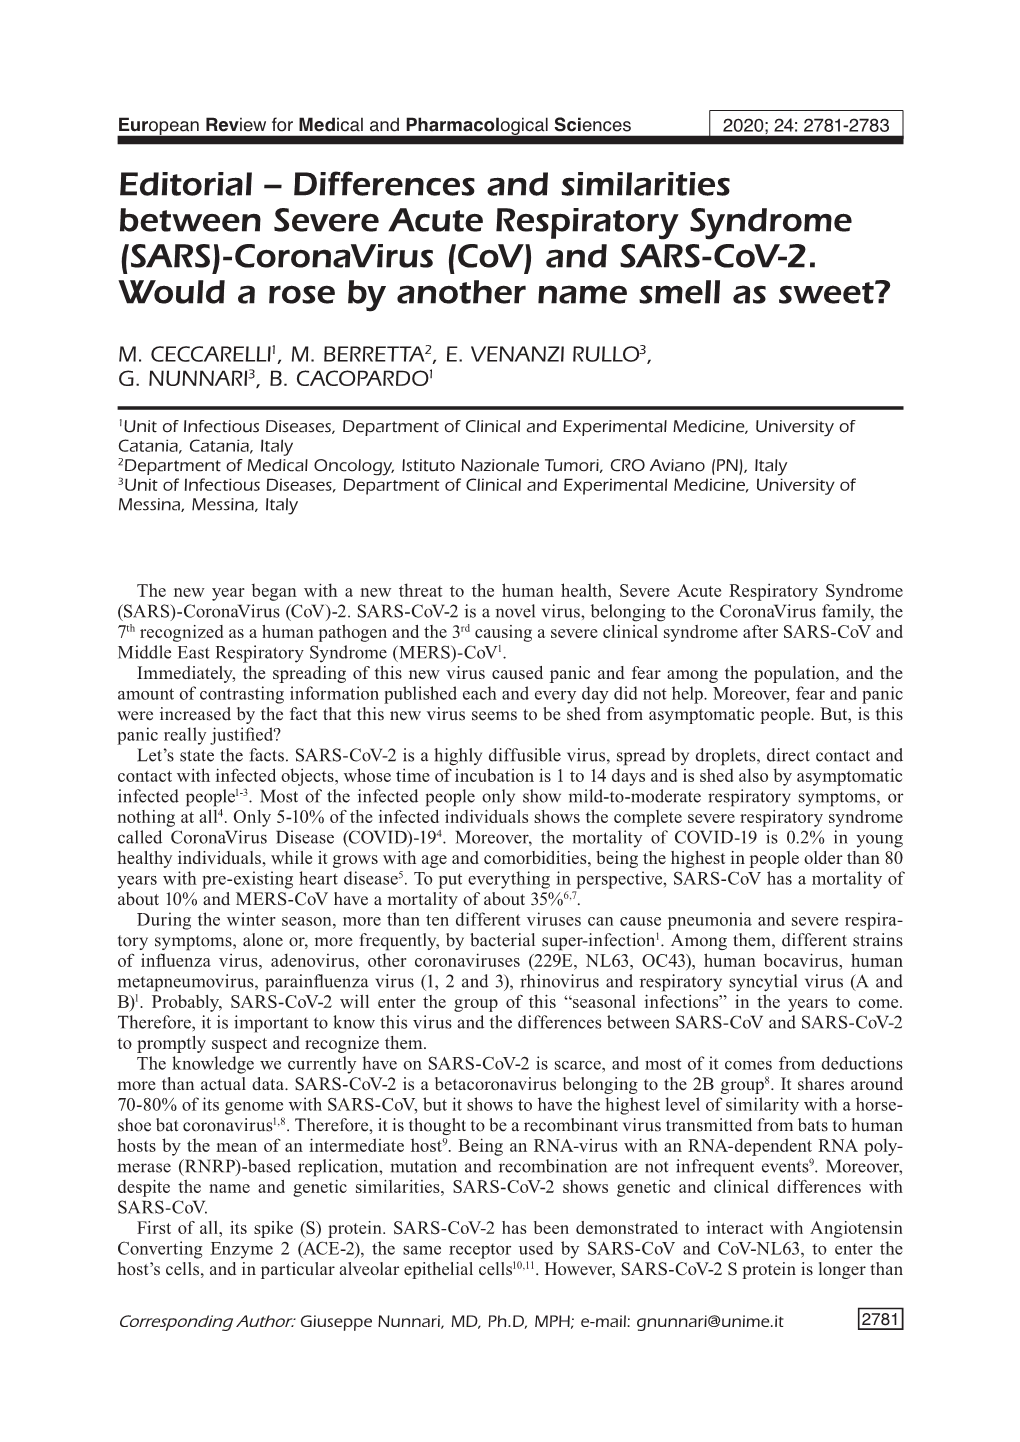 Differences and Similarities Between Severe Acute Respiratory Syndrome (SARS)-Coronavirus (Cov) and SARS-Cov-2